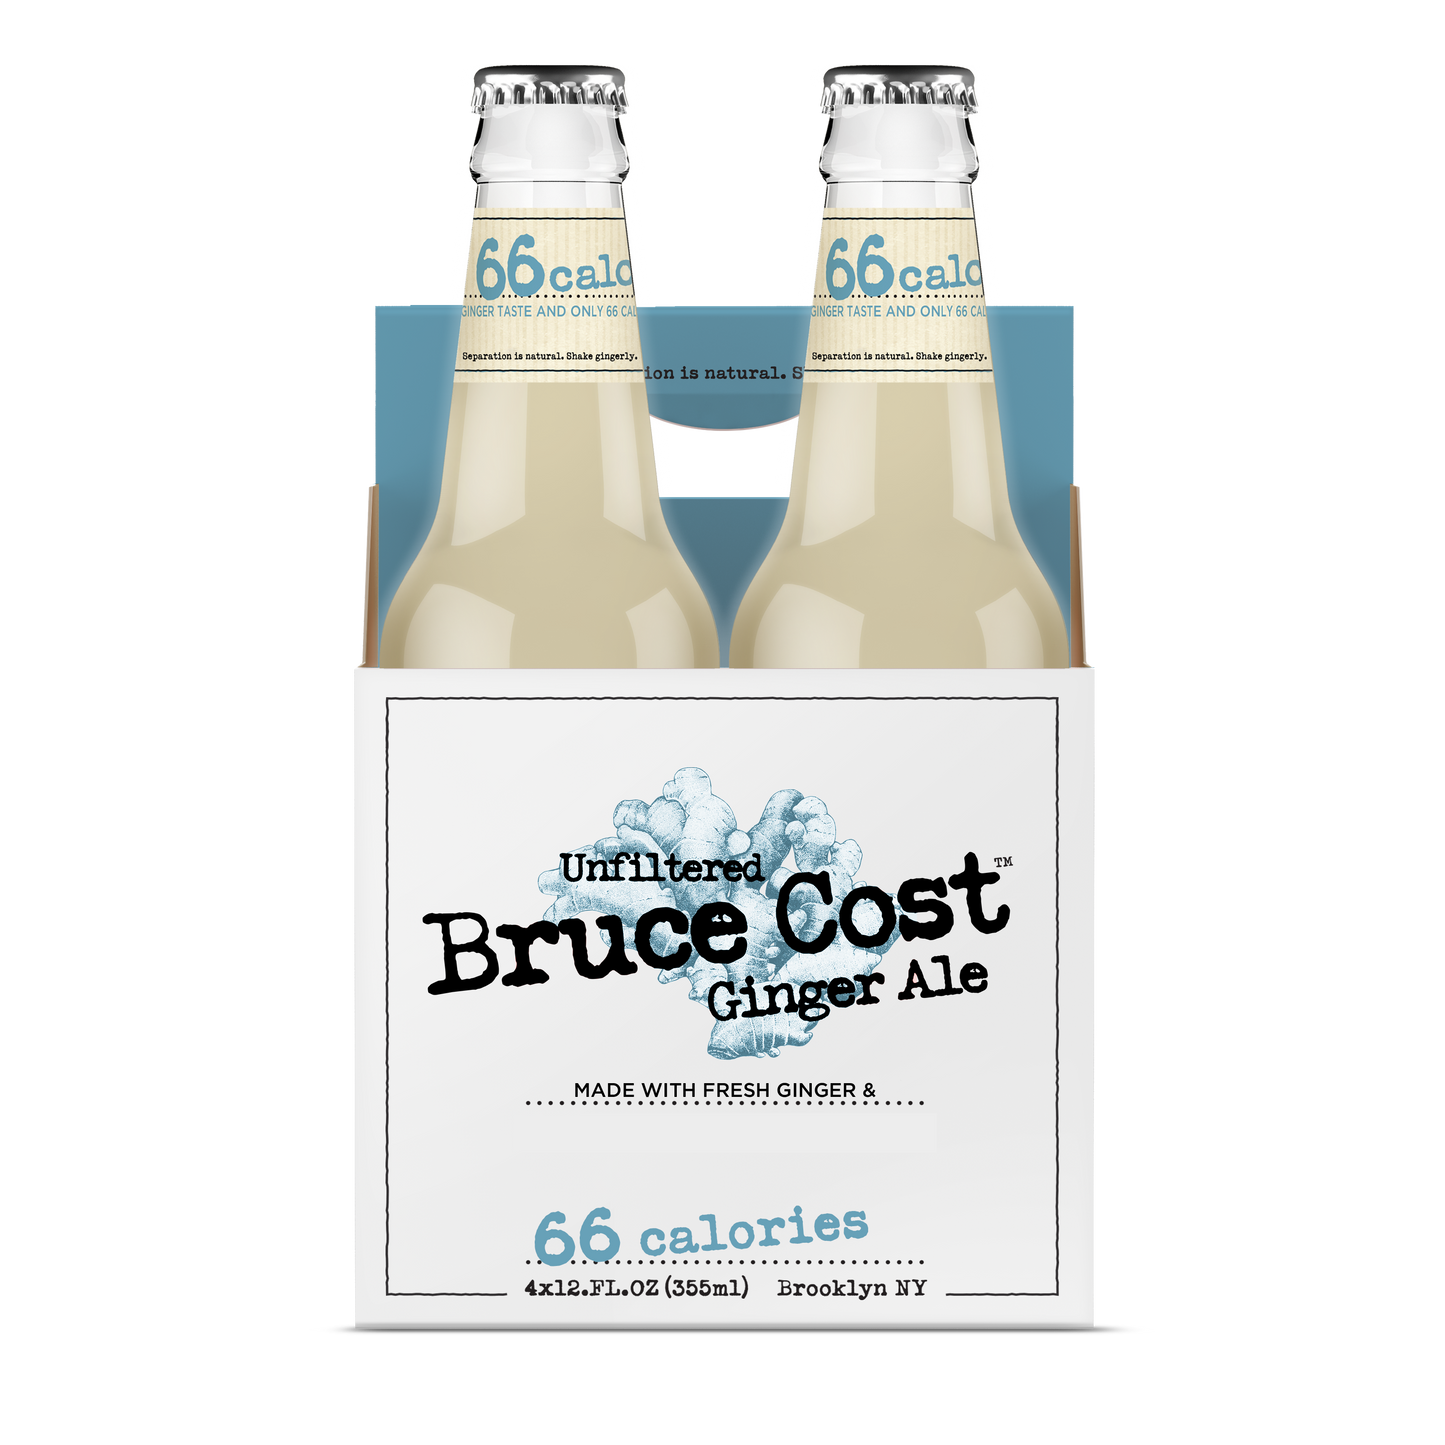 Bruce Cost Ginger Ale - 66 Calories